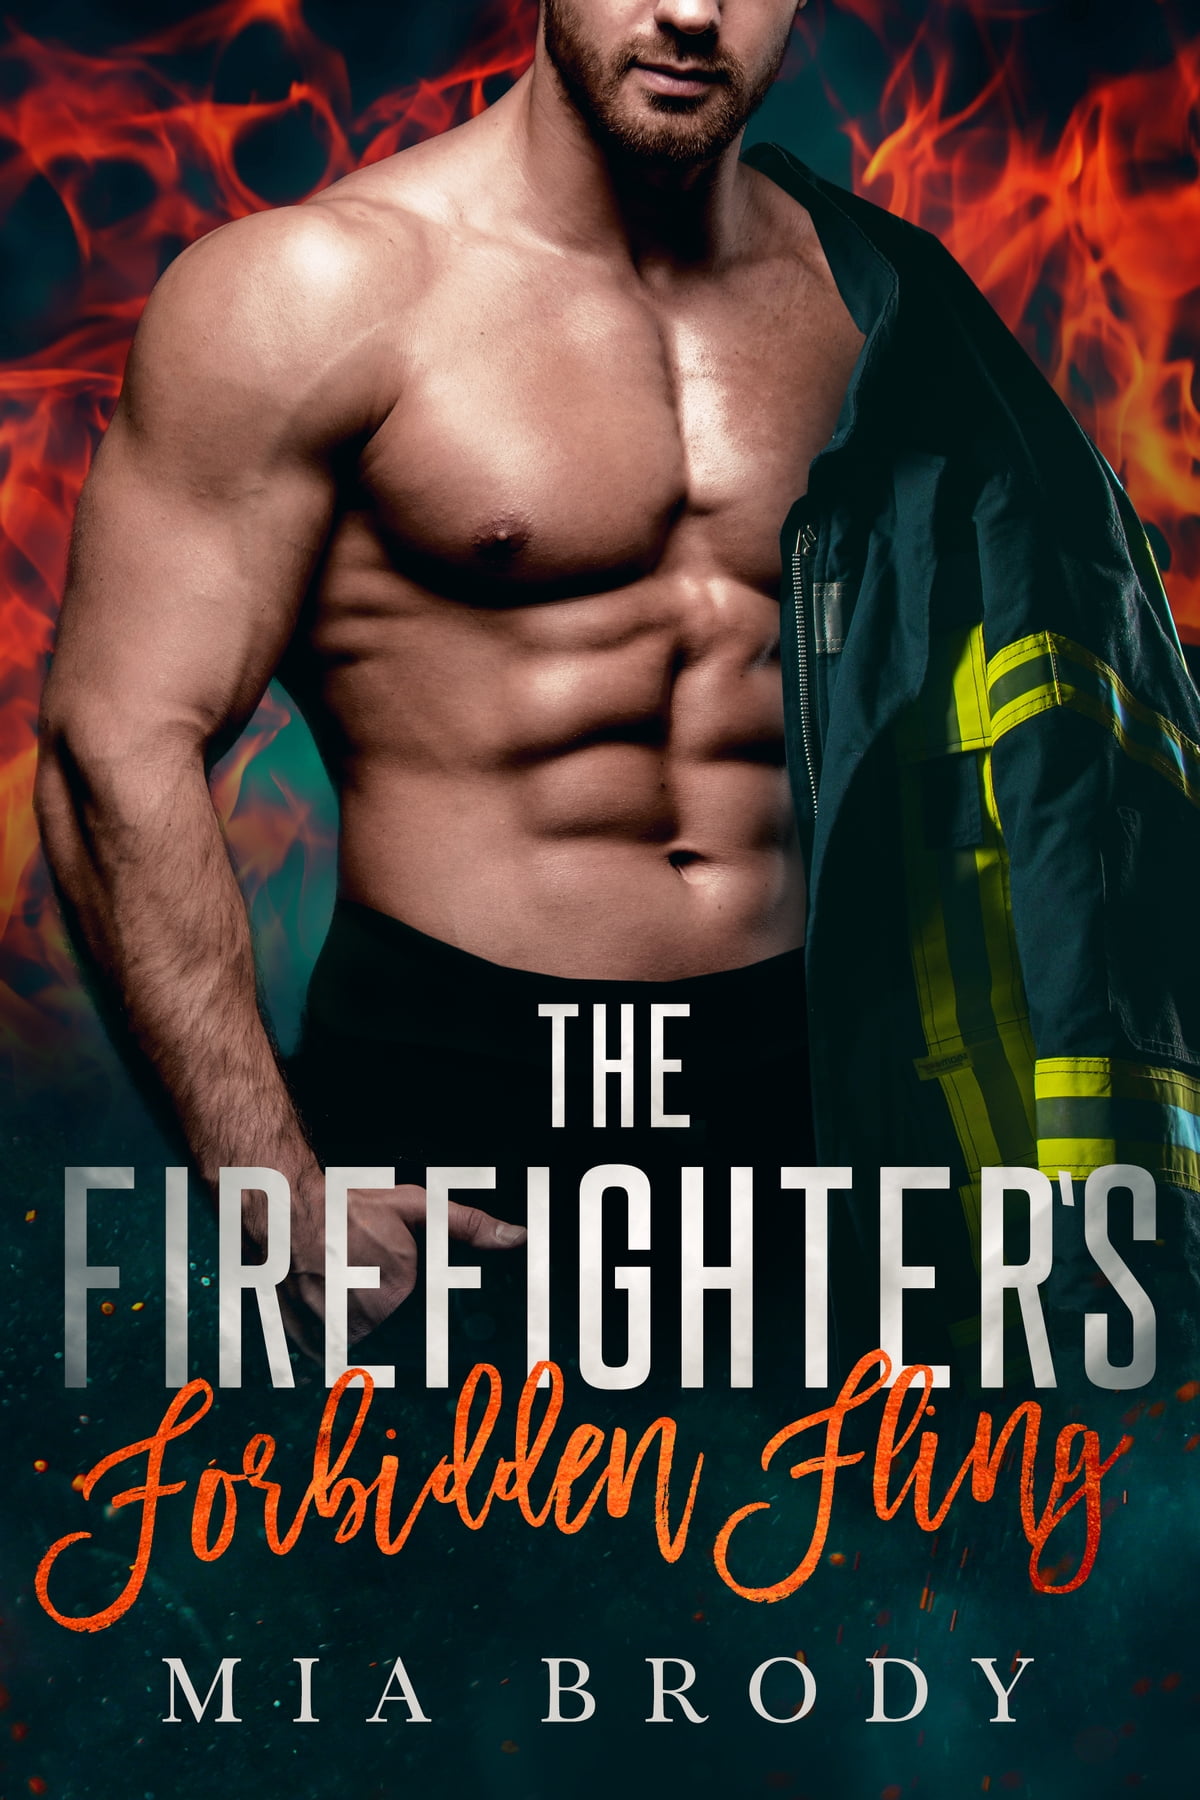 The Firefighter’s Forbidden Fling by Mia Brody PDF Download